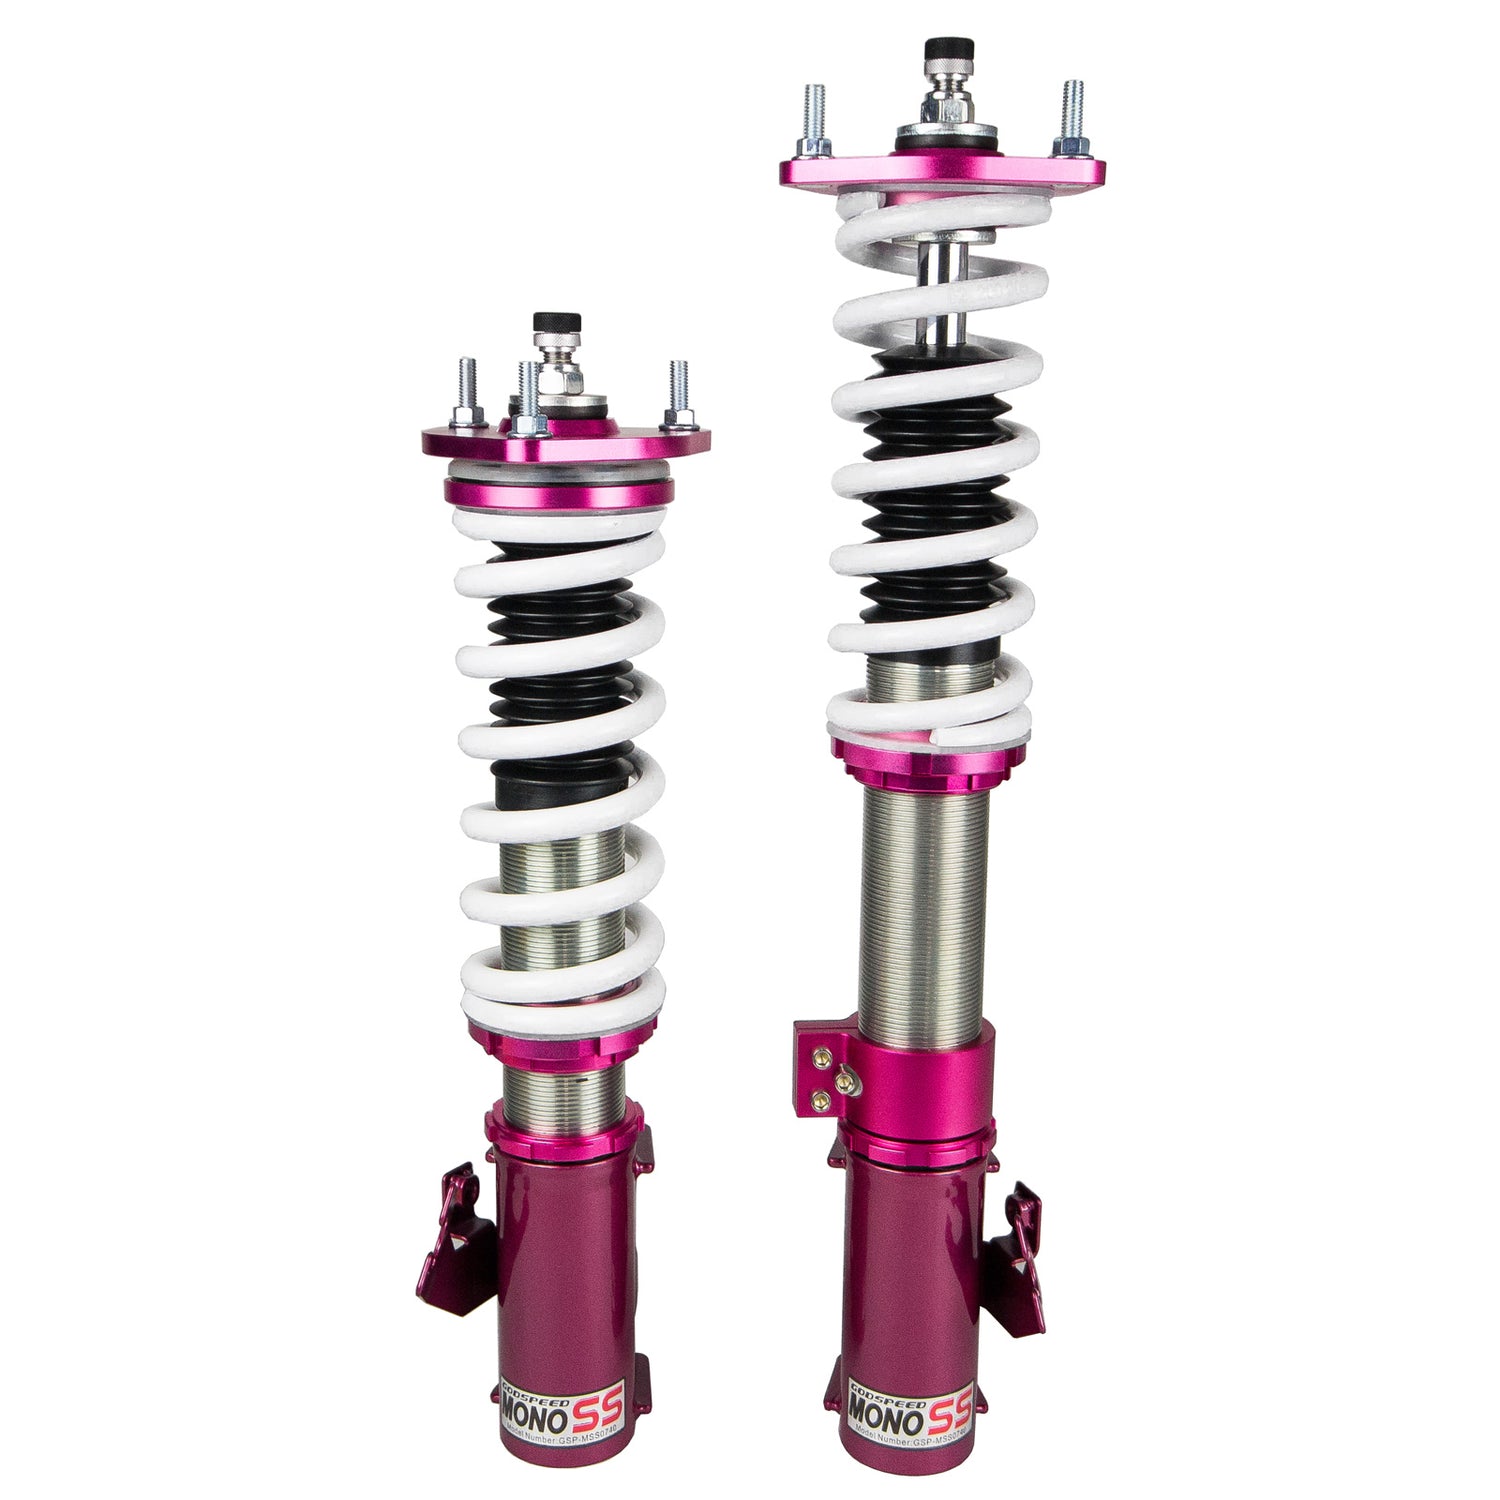 Godspeed MSS0740-C MonoSS Coilover Lowering Kit, Fully Adjustable, Ride Height, Spring Tension And 16 Click Damping, Nissan Pulsar(N14) 1991-94(2WD)